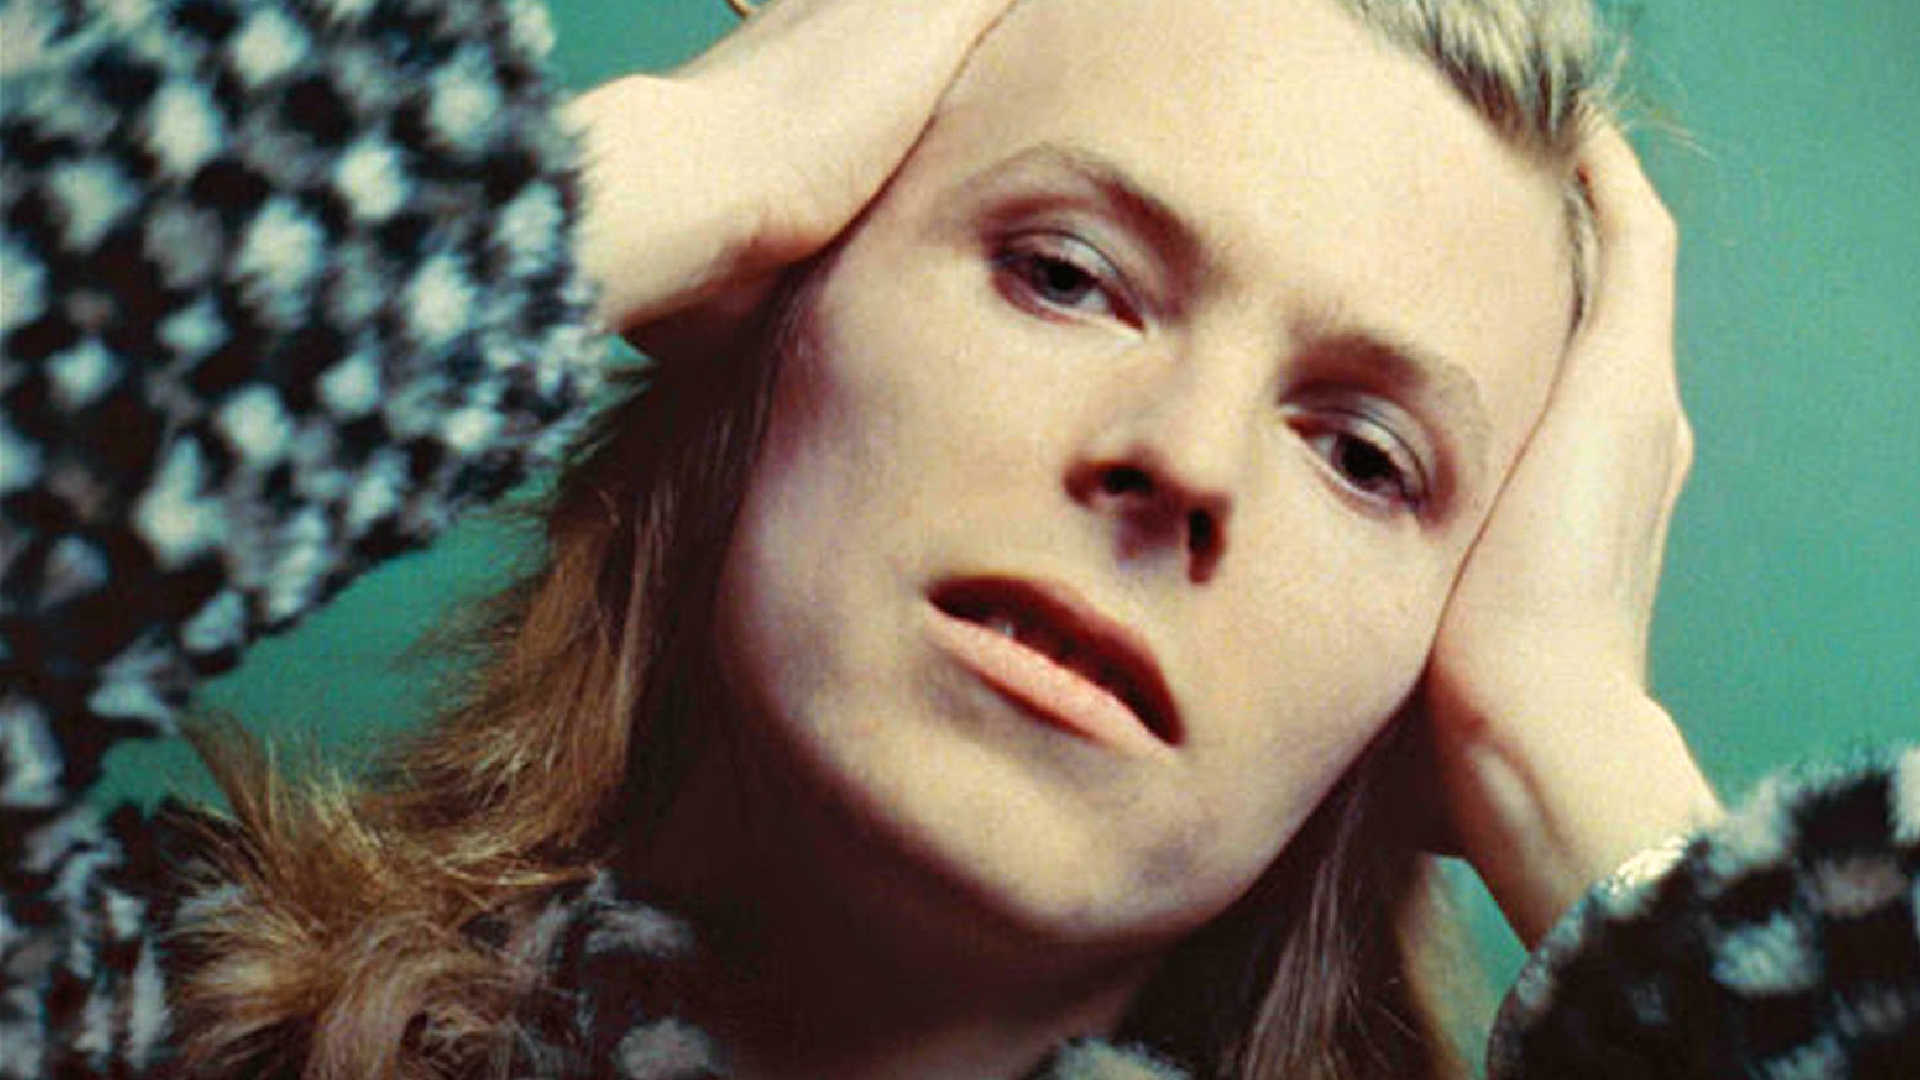 David Bowie, Changes, from Hunky Dory